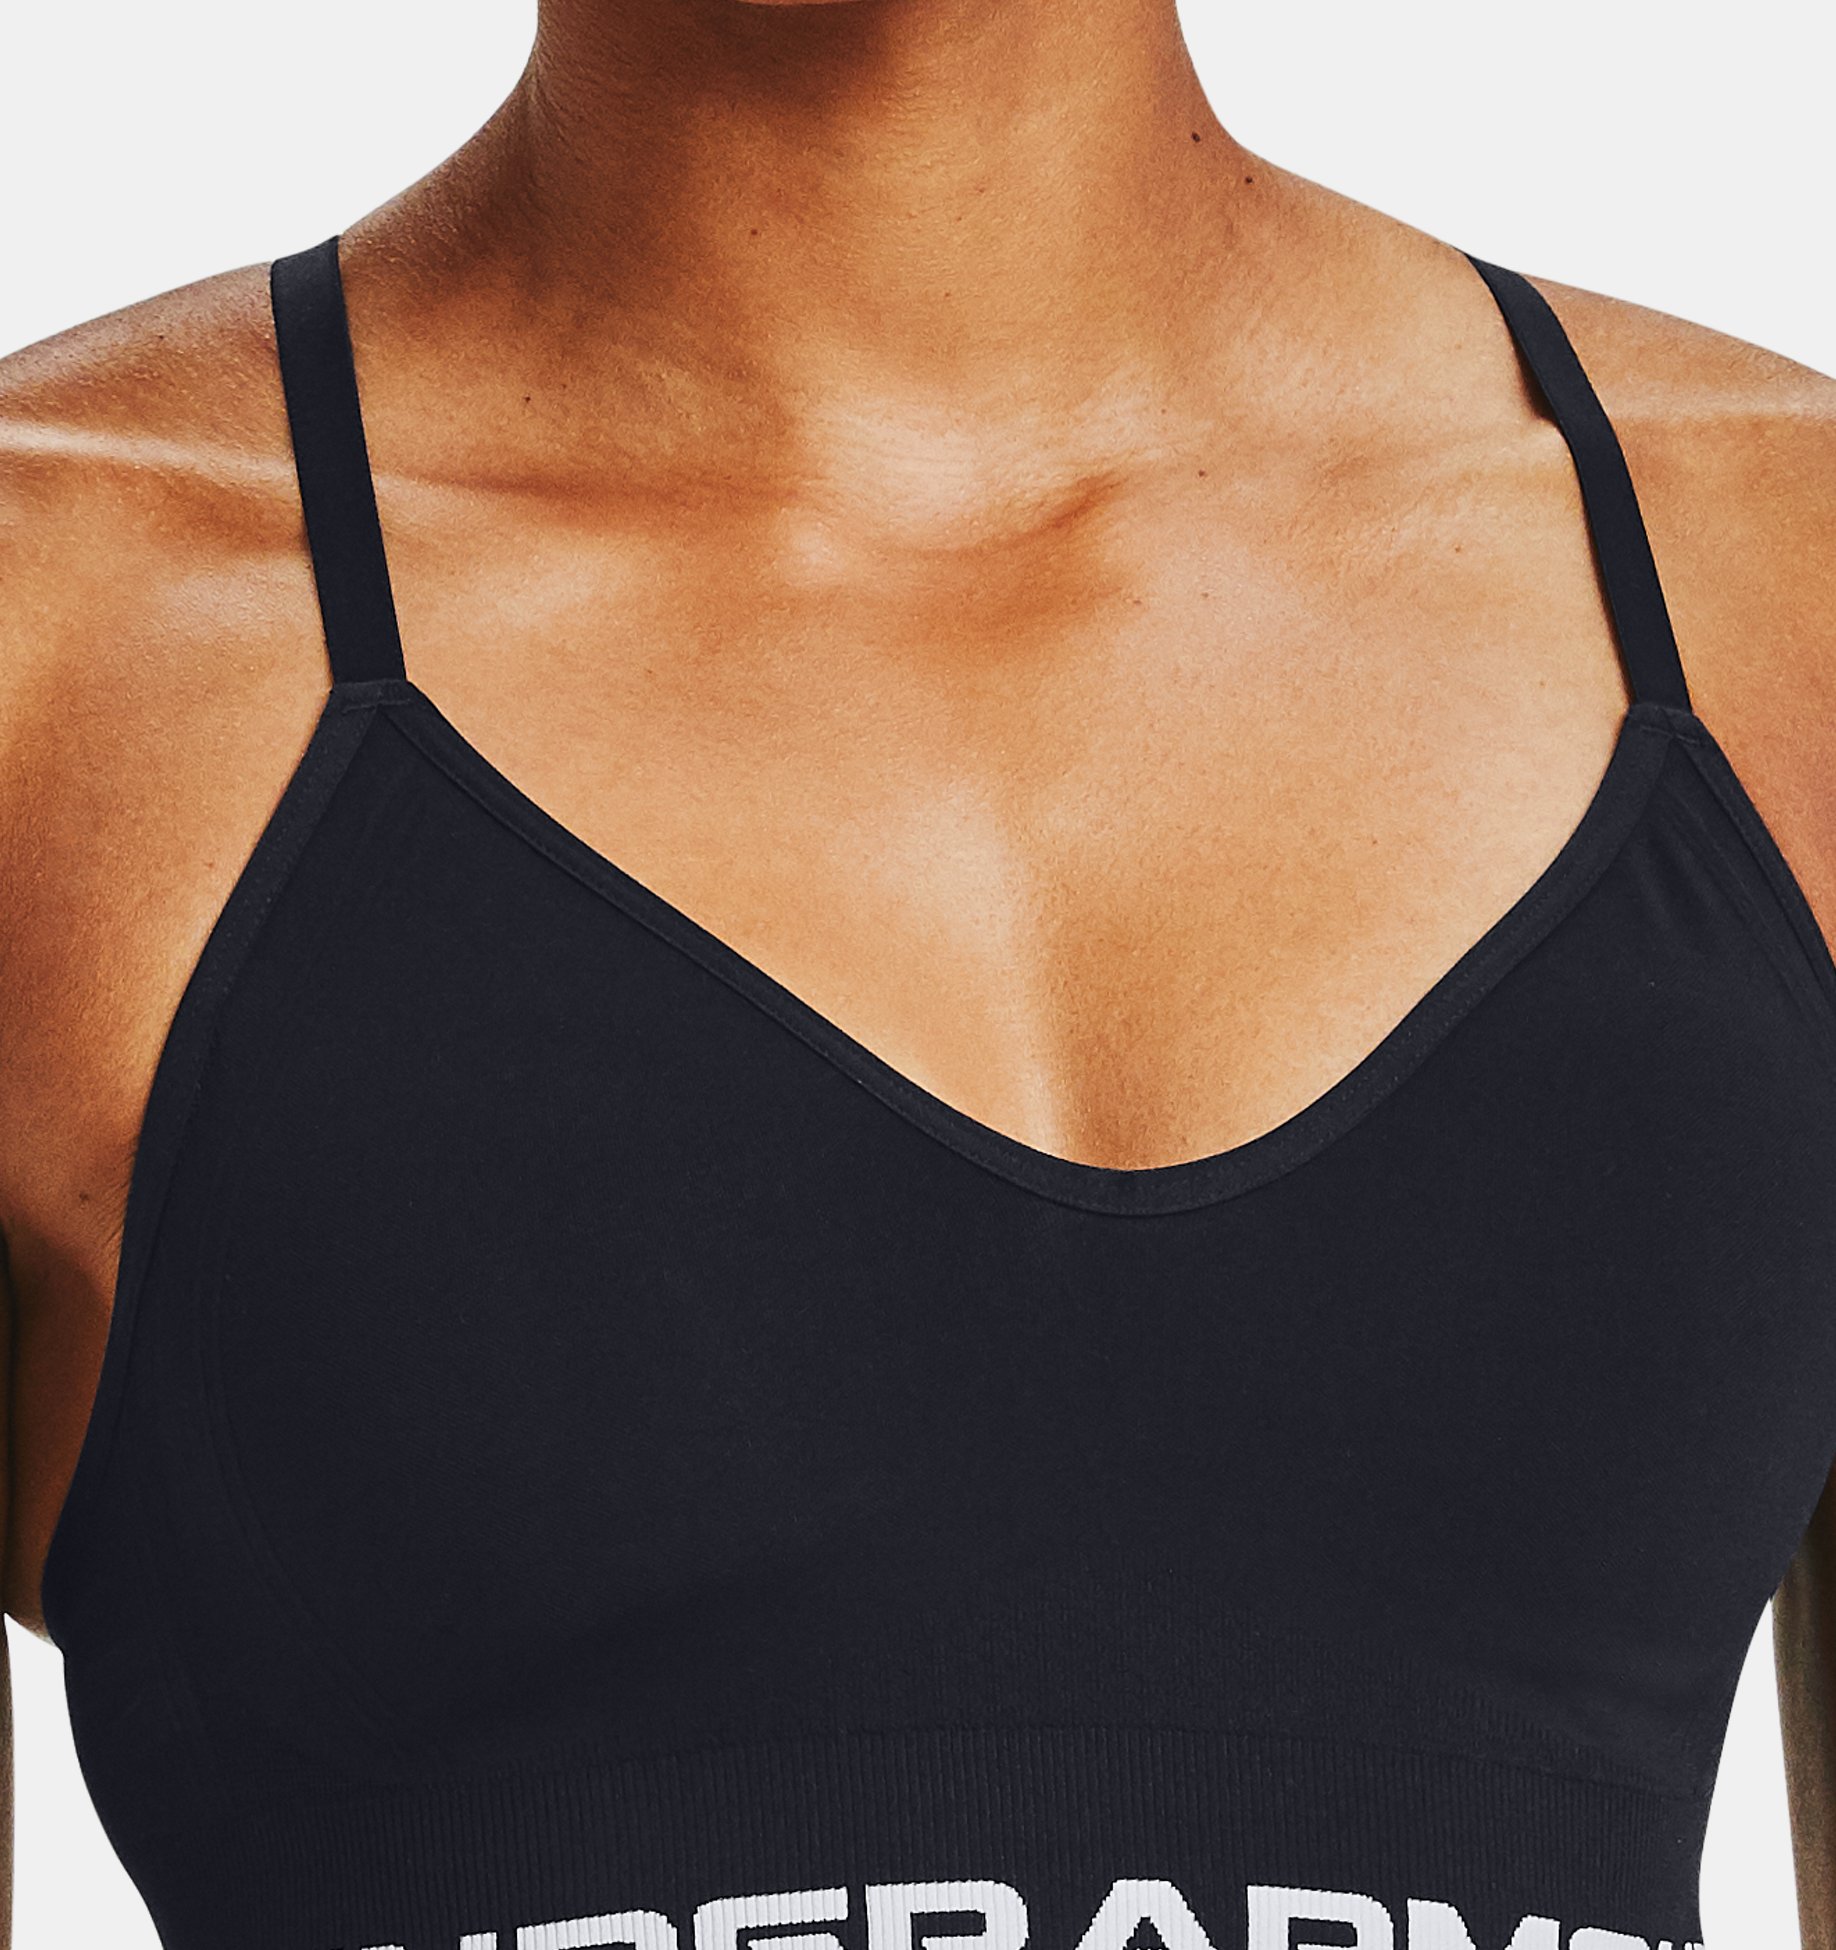 Aueoeo Seamless Sports Bras for Women, Compression Bra for Women